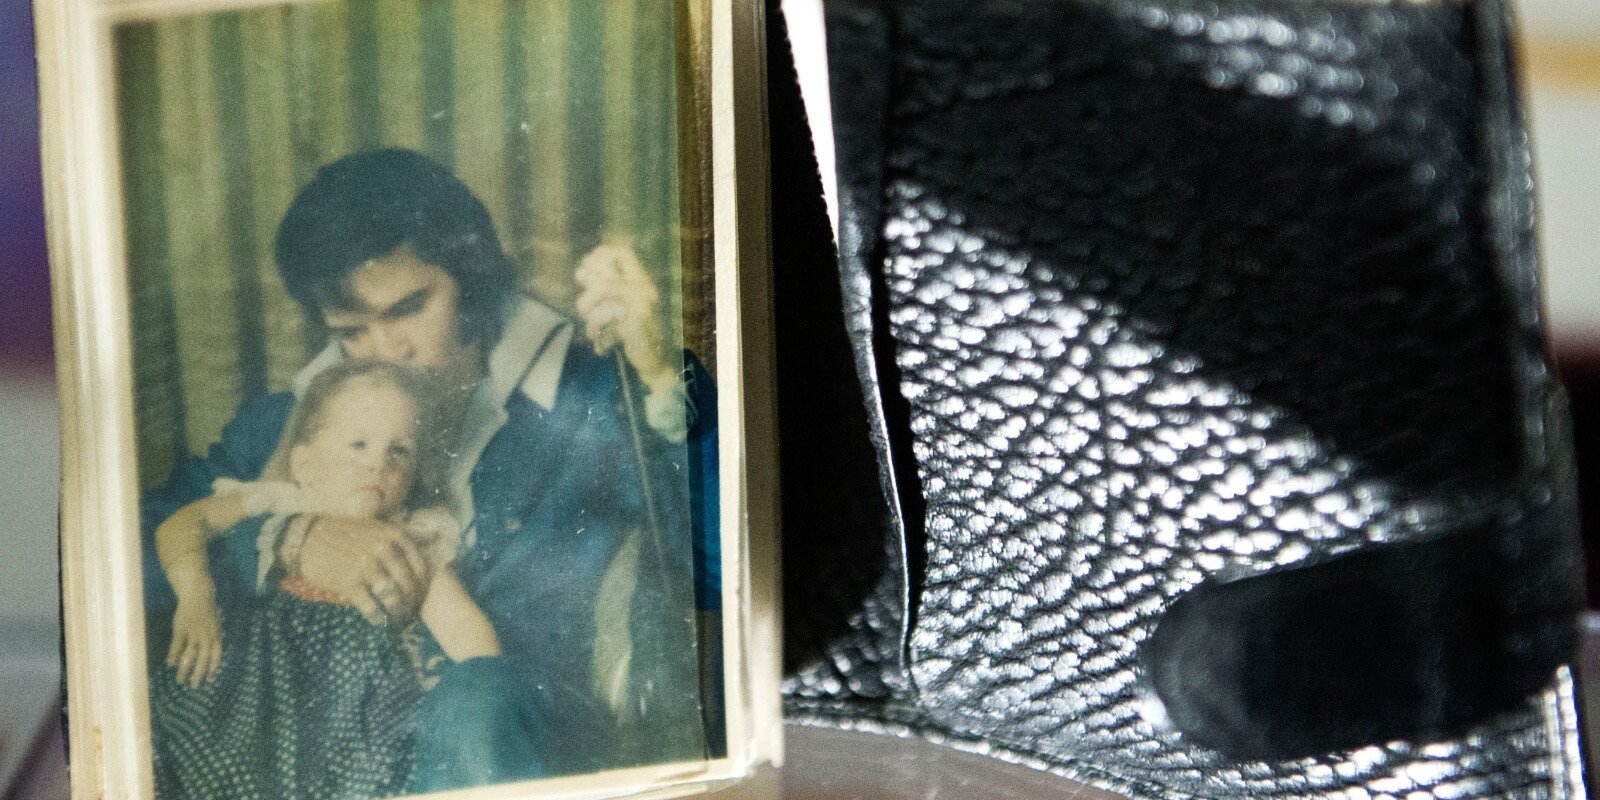 A photograph of Elvis Presley and his daughter Lisa Marie Presley in his wallet.